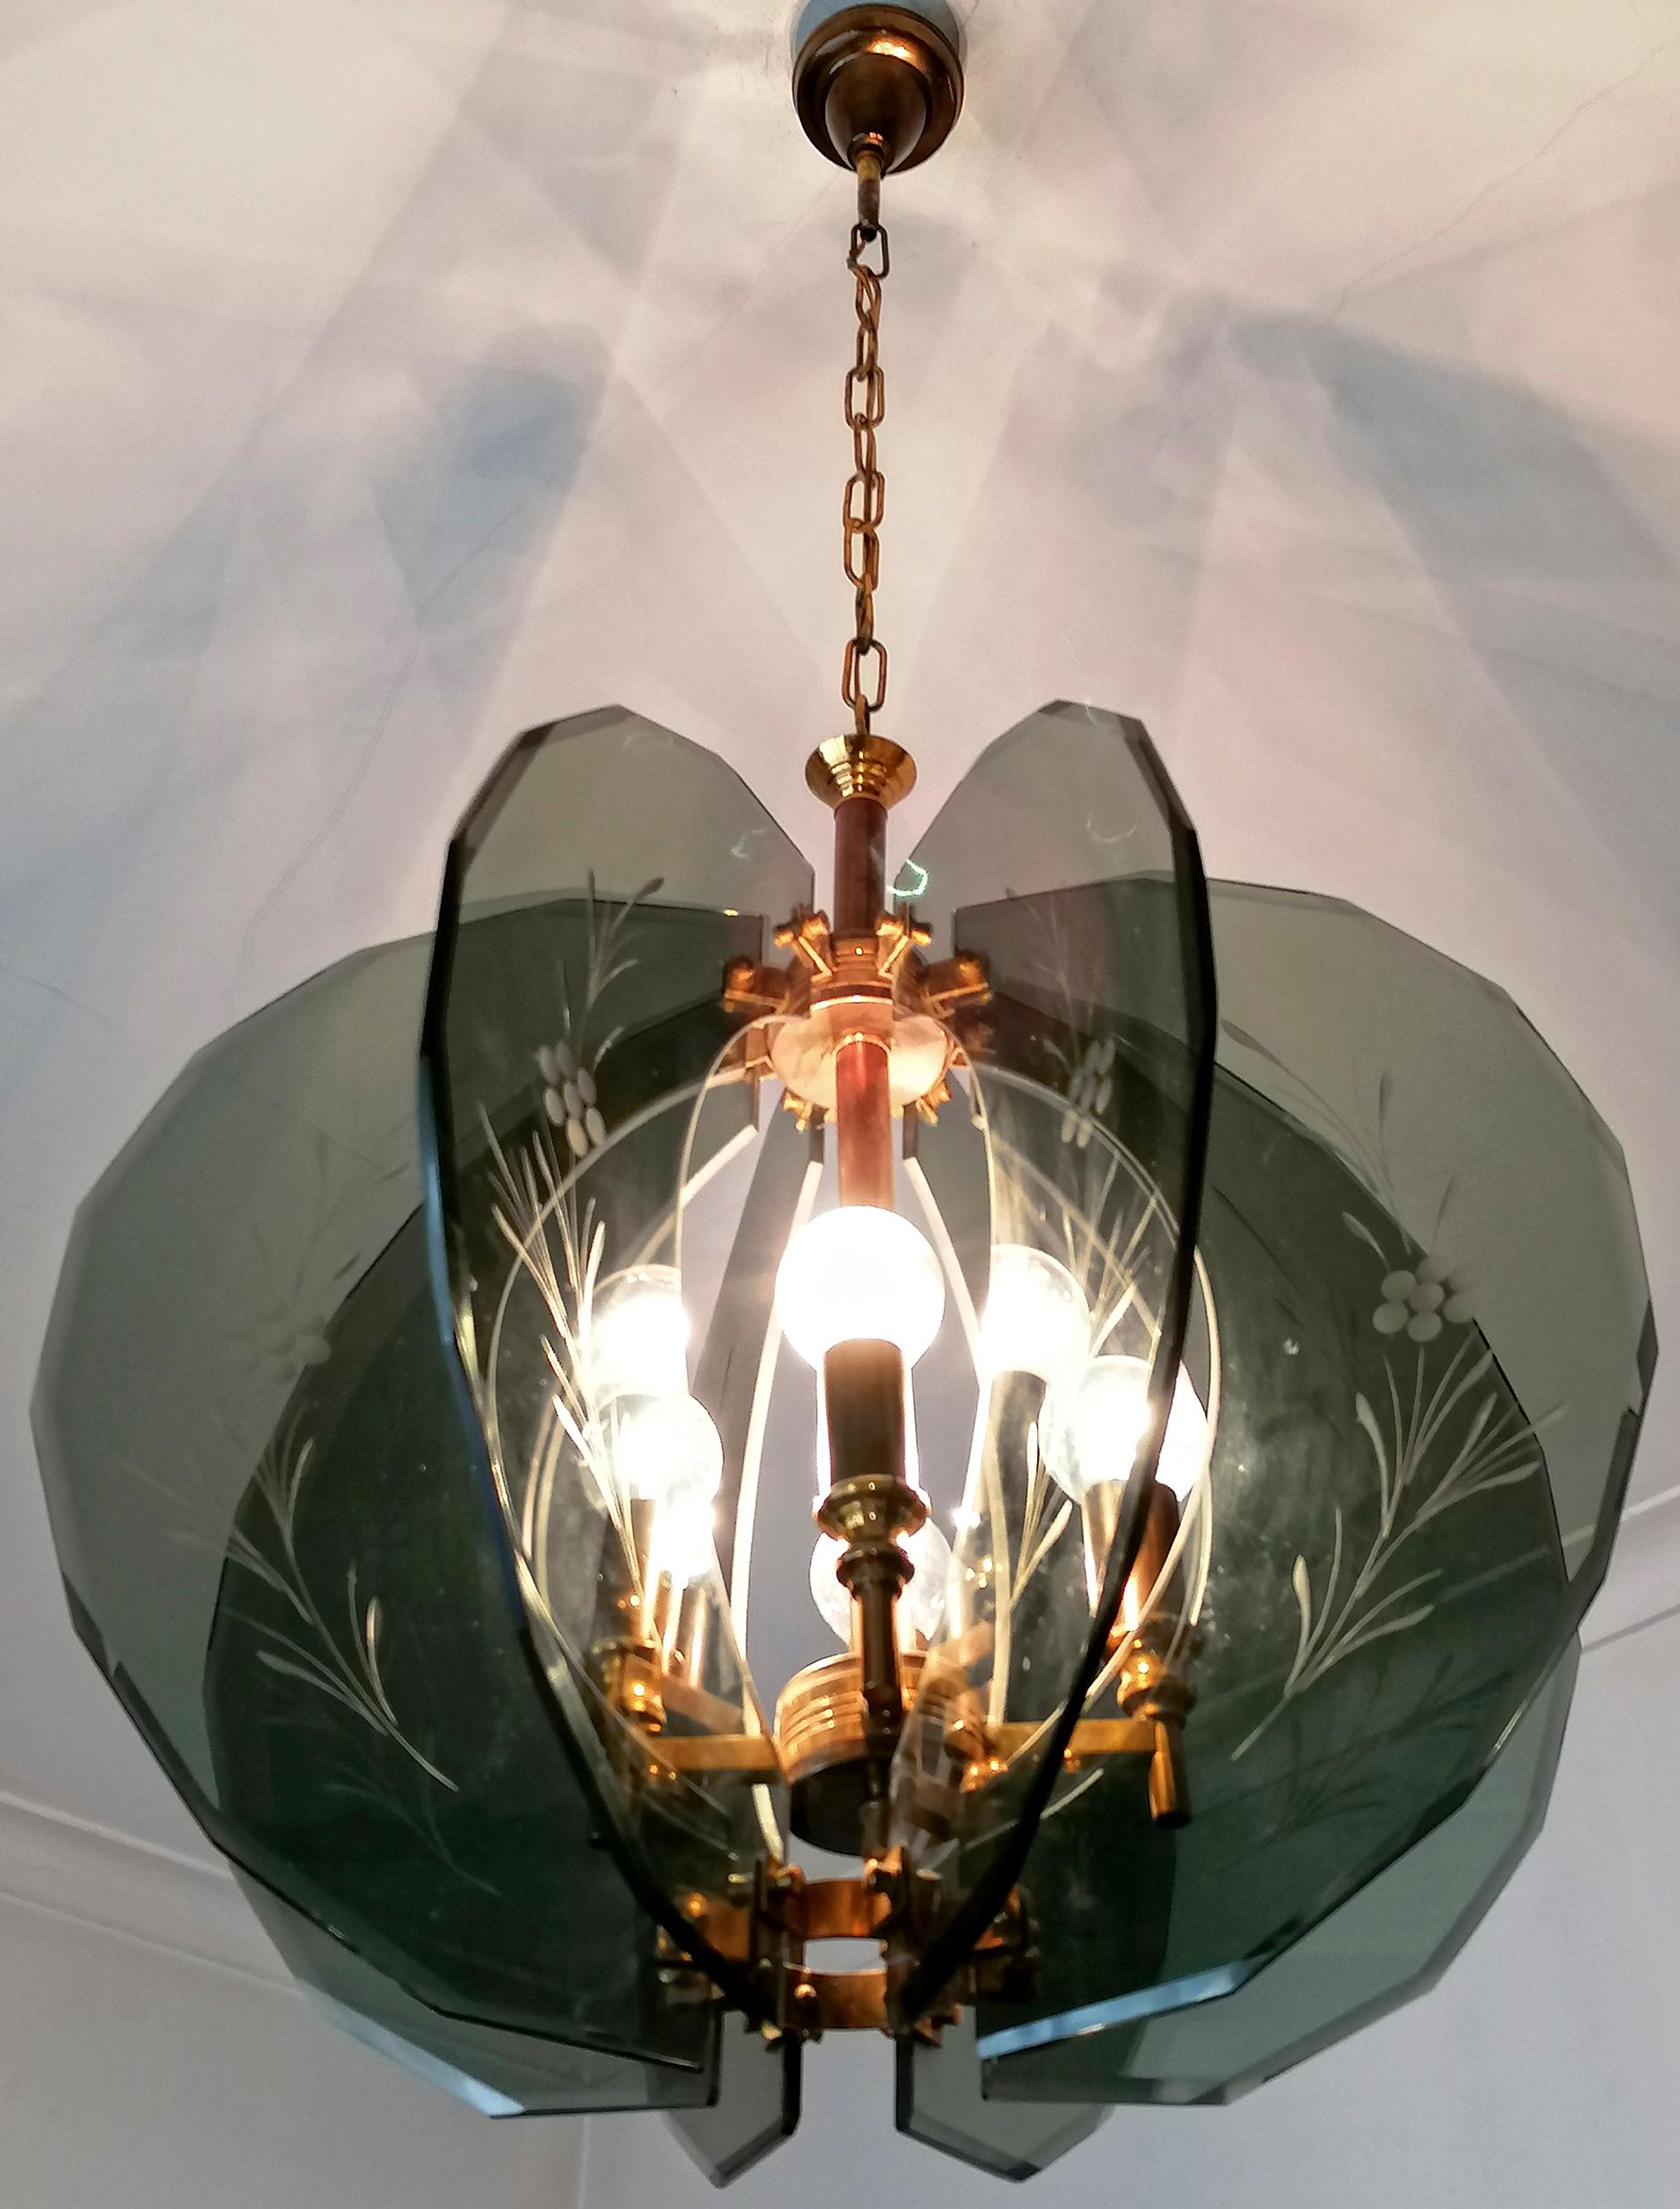 Vintage Gino Paroldo Chandelier with Brass and Smoked Hand Cut Glass, 1950s For Sale 4